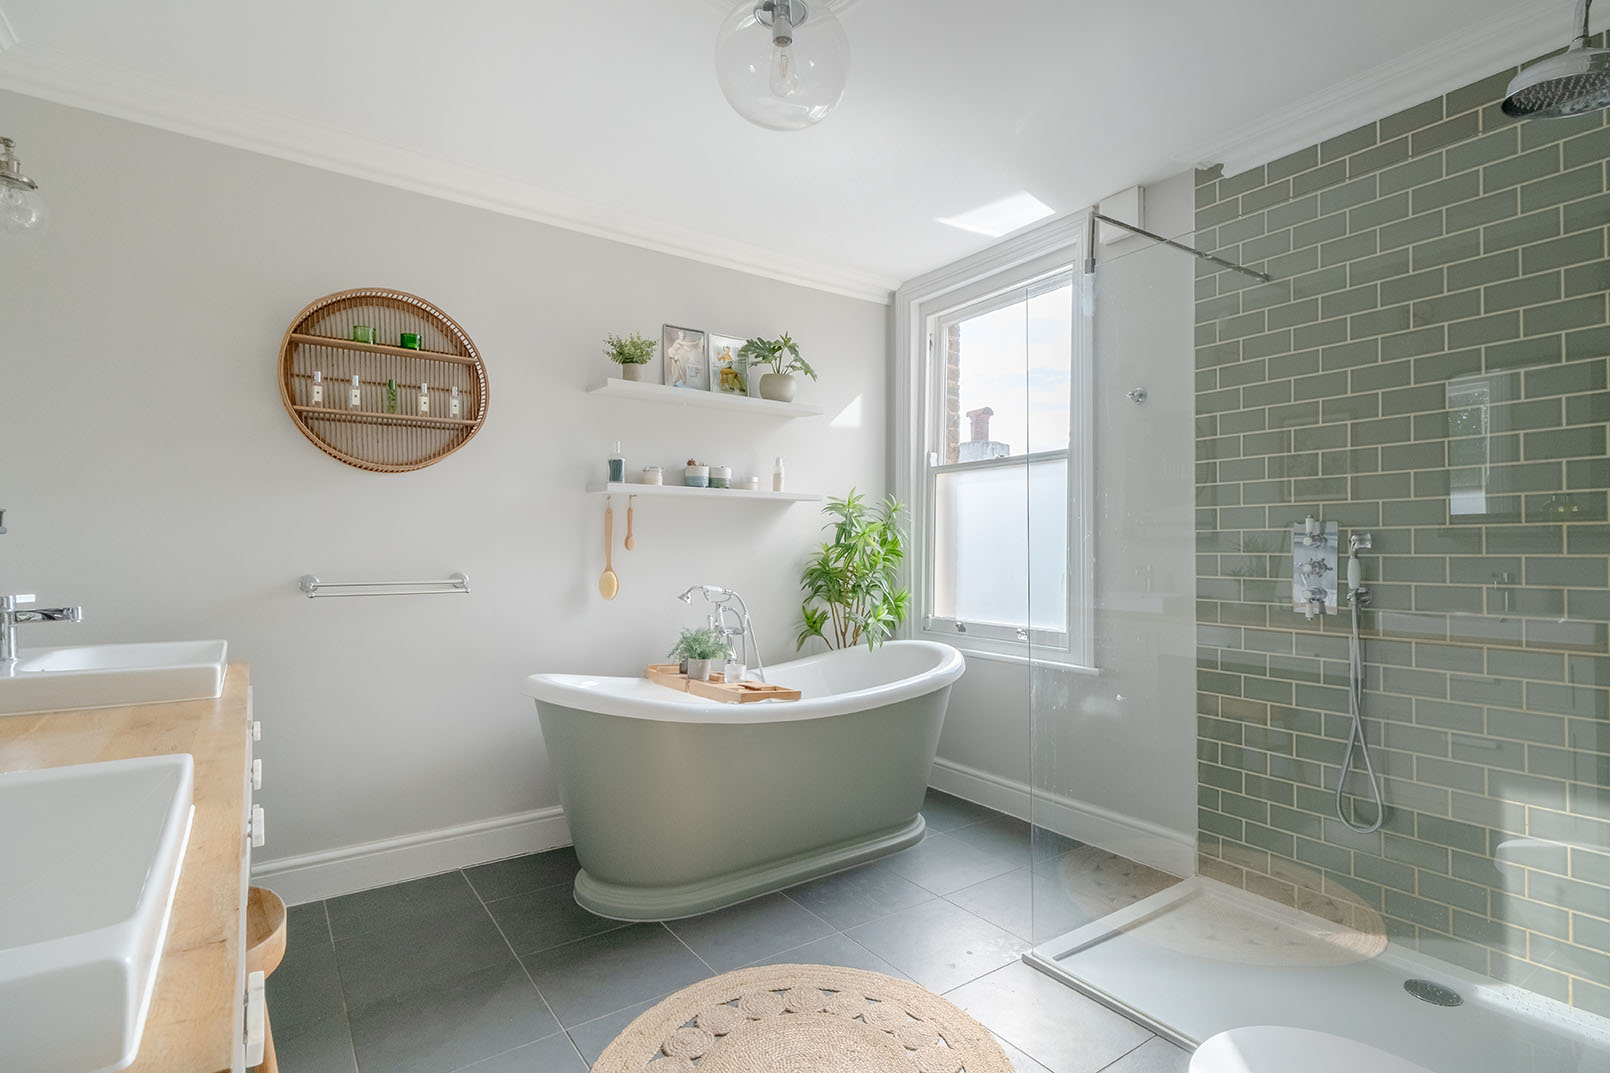 a bathroom photo from a property photography series, natural colours, bright and modern design space, light grey walls, showing the bathtub, the window and decorative elements on the wall